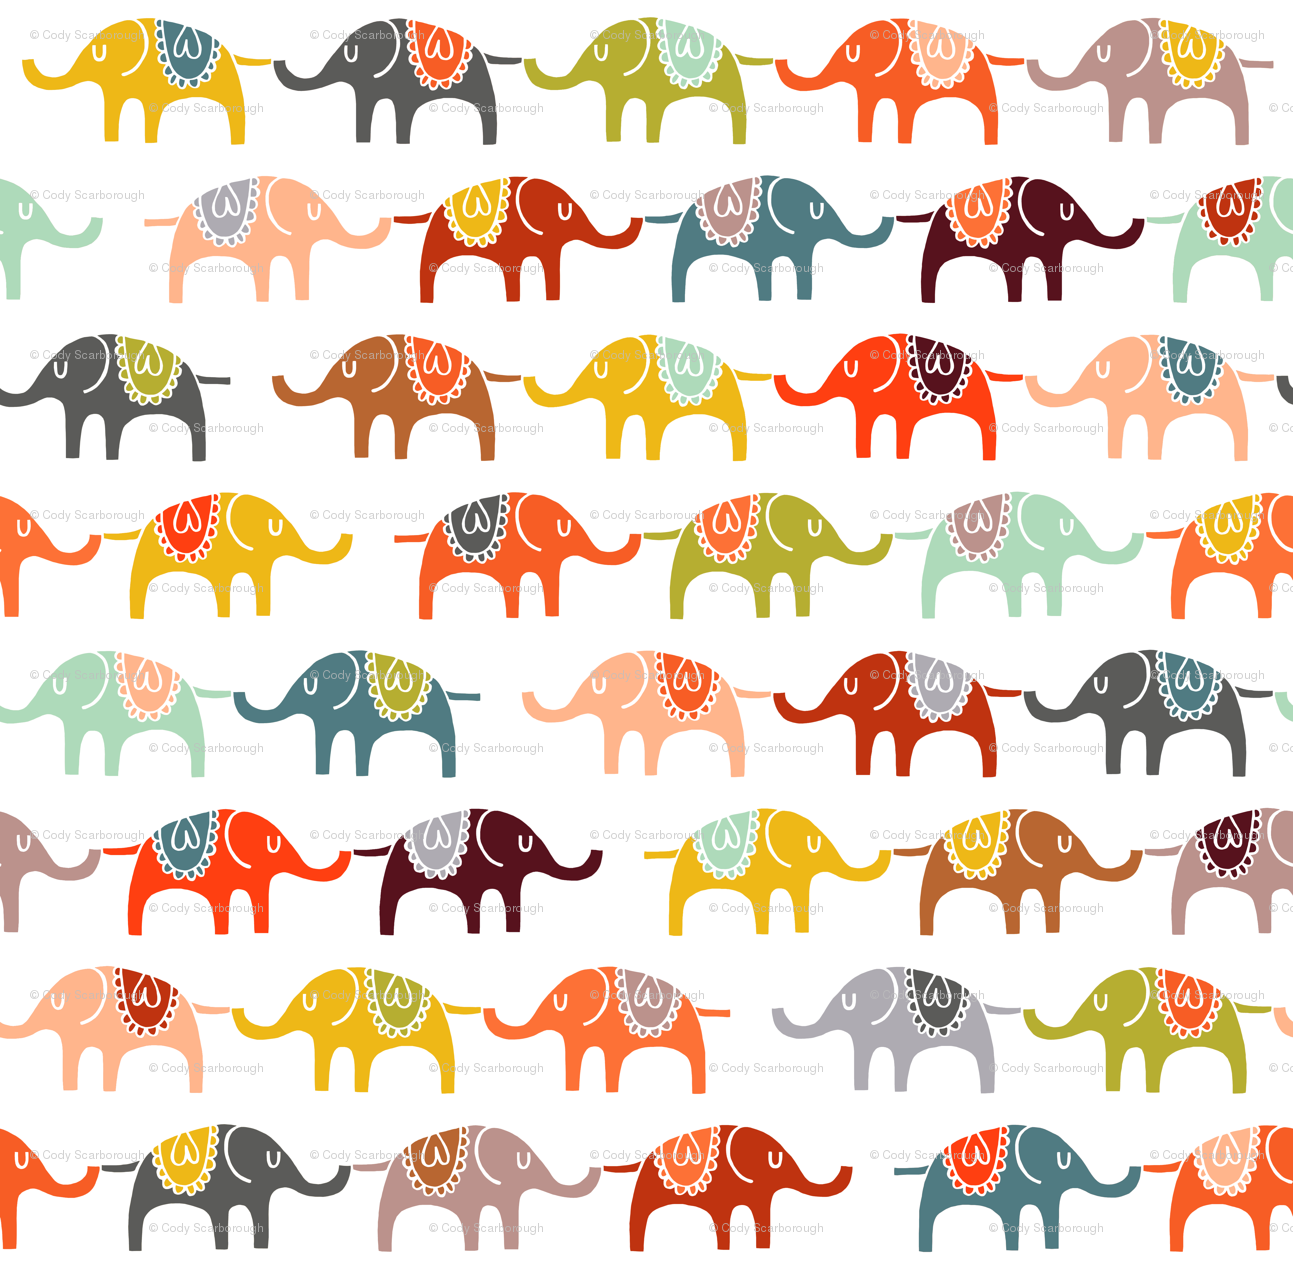 Displaying Image For Trippy Elephant Background